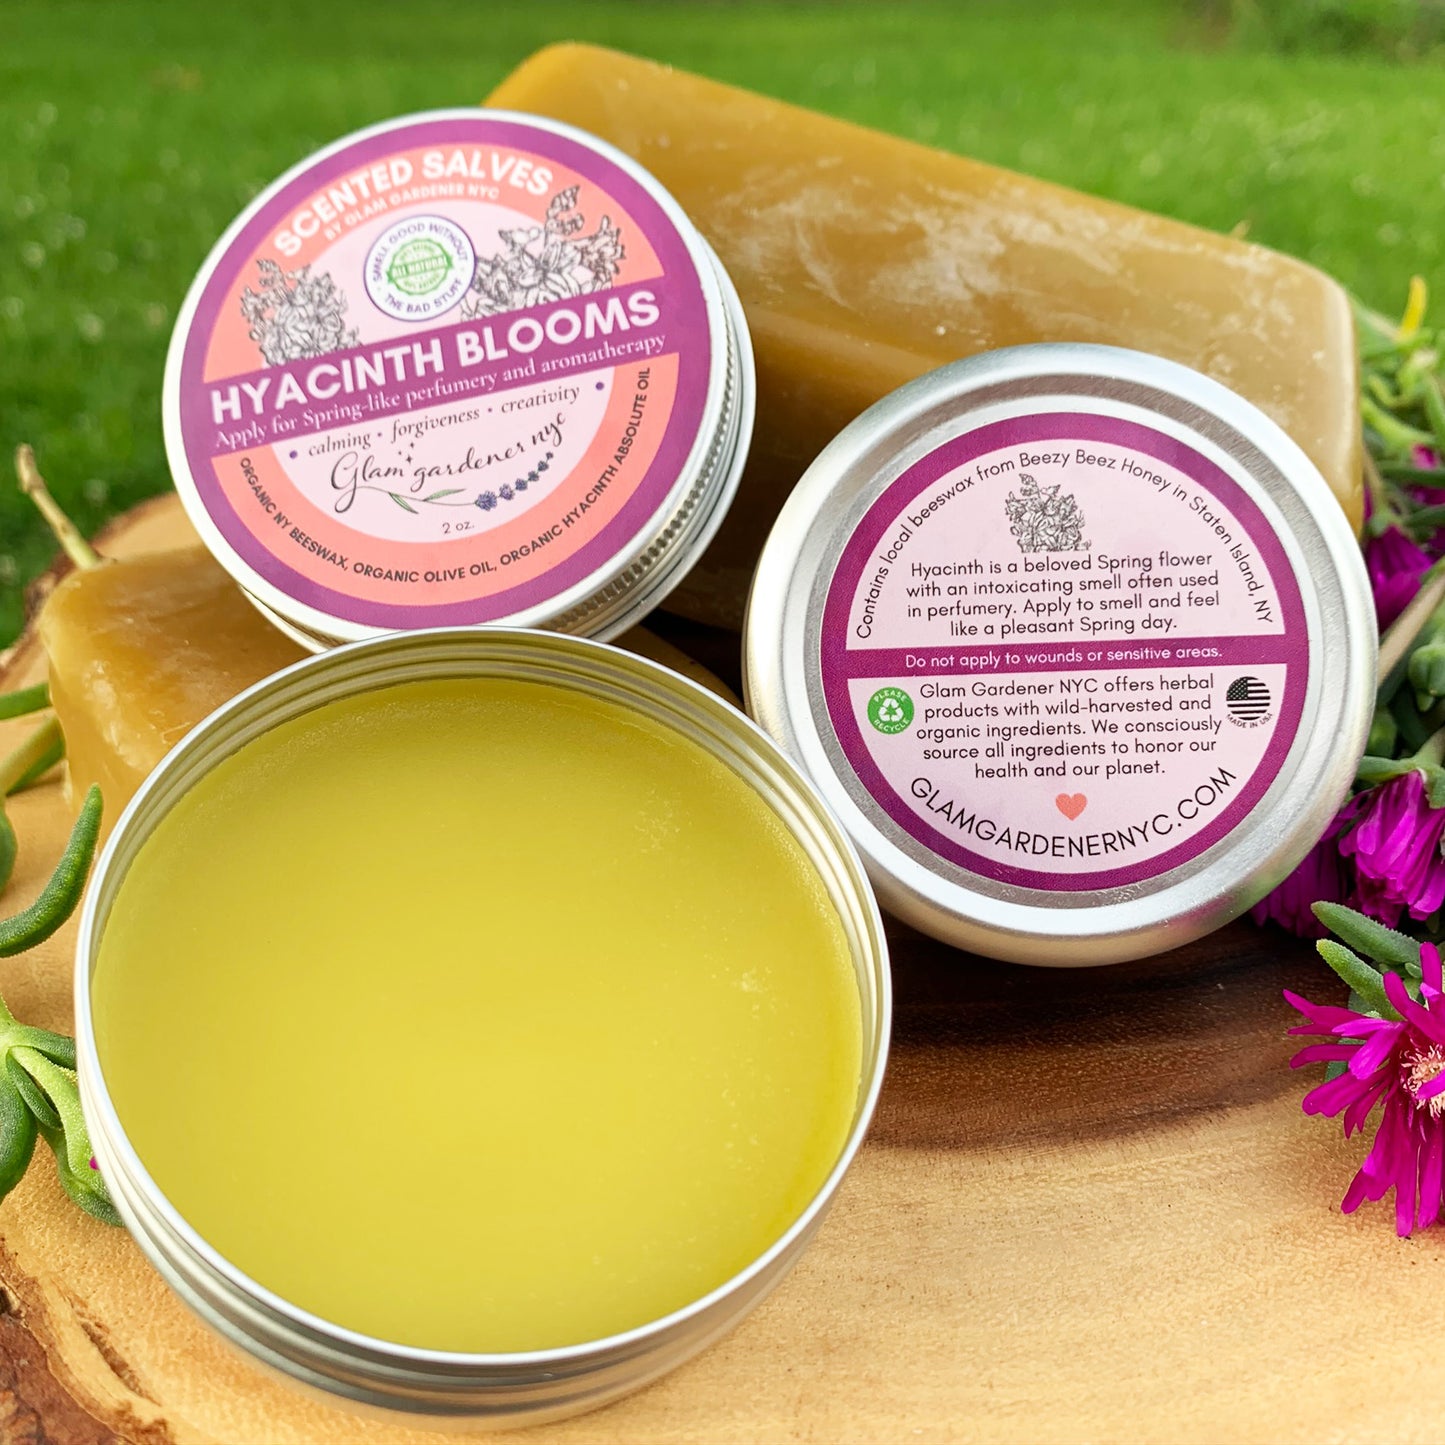 Hyacinth Blooms scented salve | natural solid perfume and healing lotion